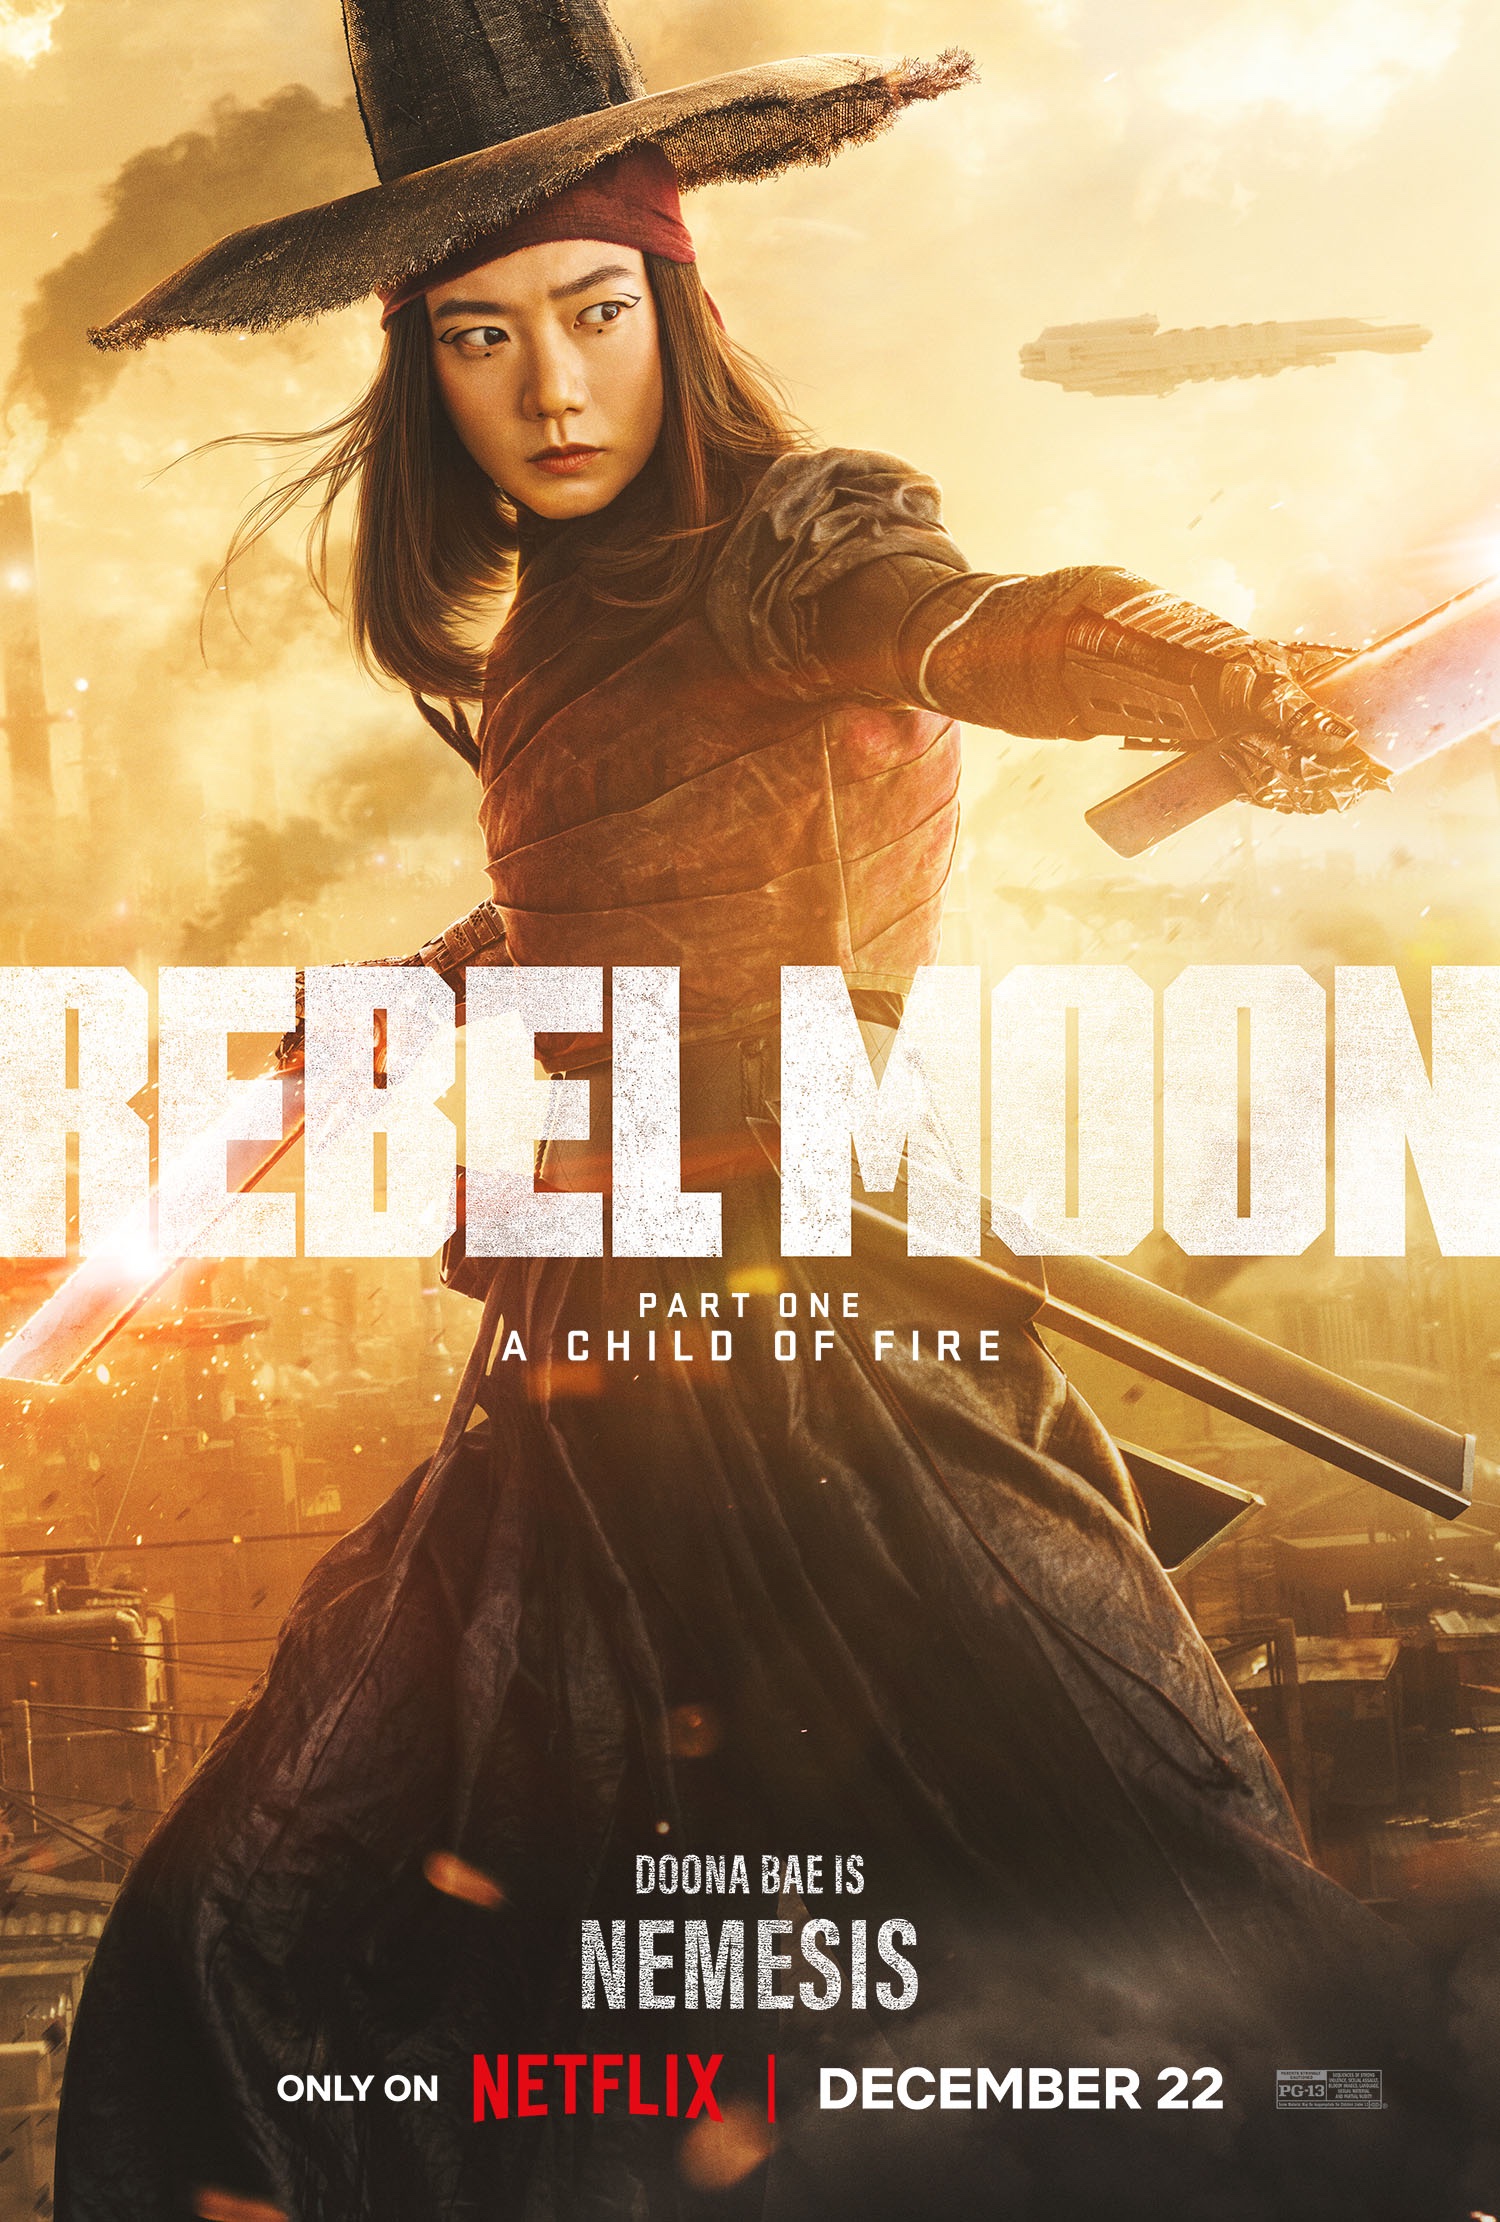 Watch Rebel Moon — Part One: A Child of Fire